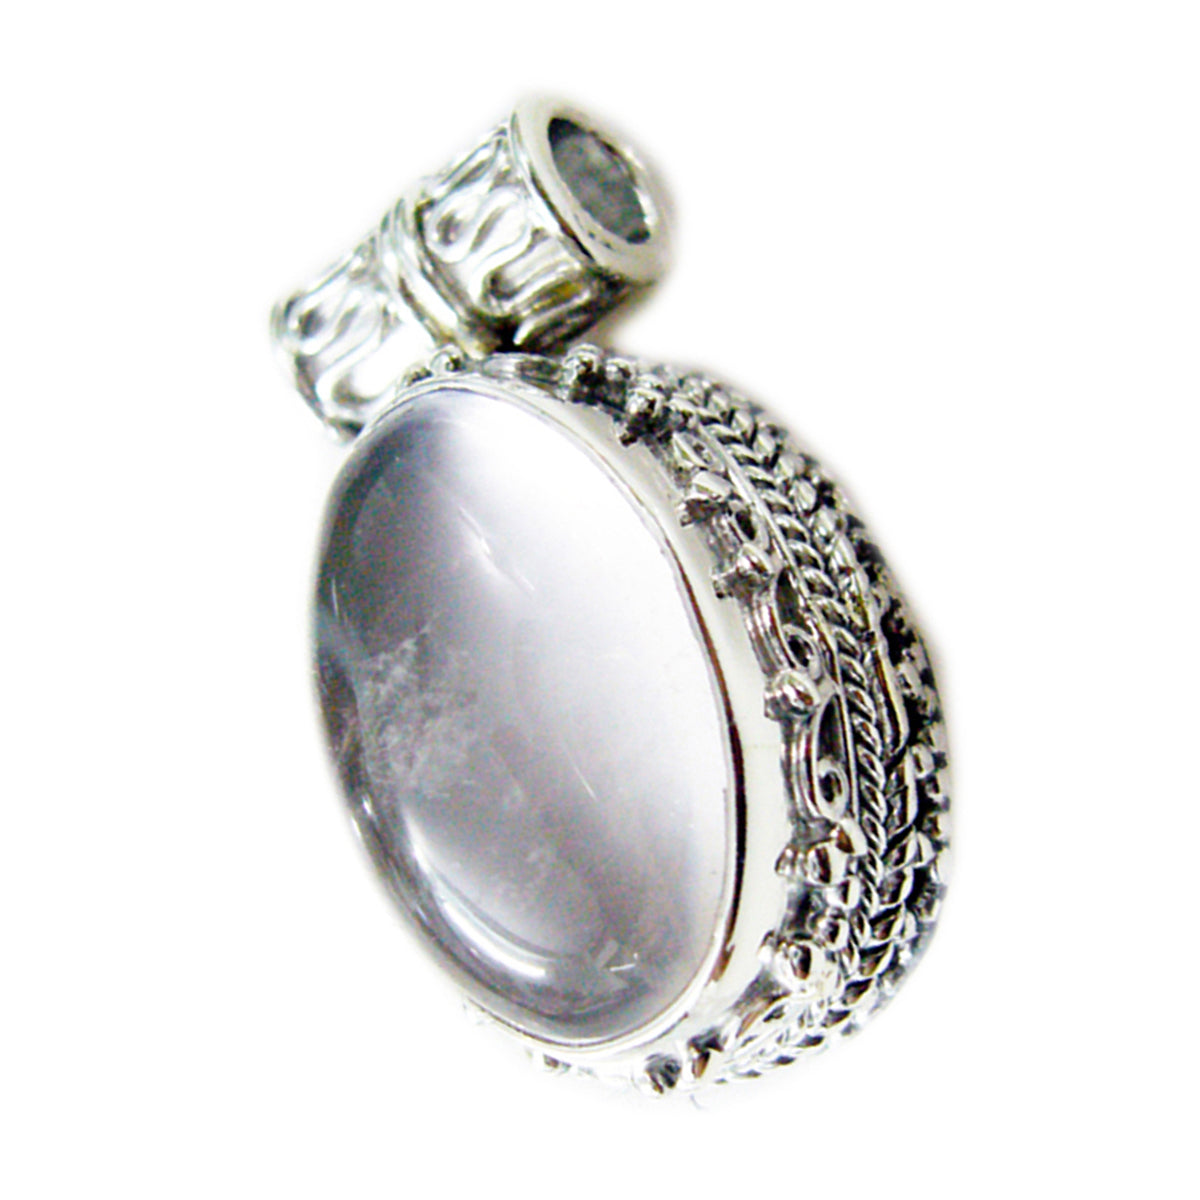 Riyo Real Gems Oval Cabochon Pink Rose Quartz Solid Silver Pendant Gift For Good Friday